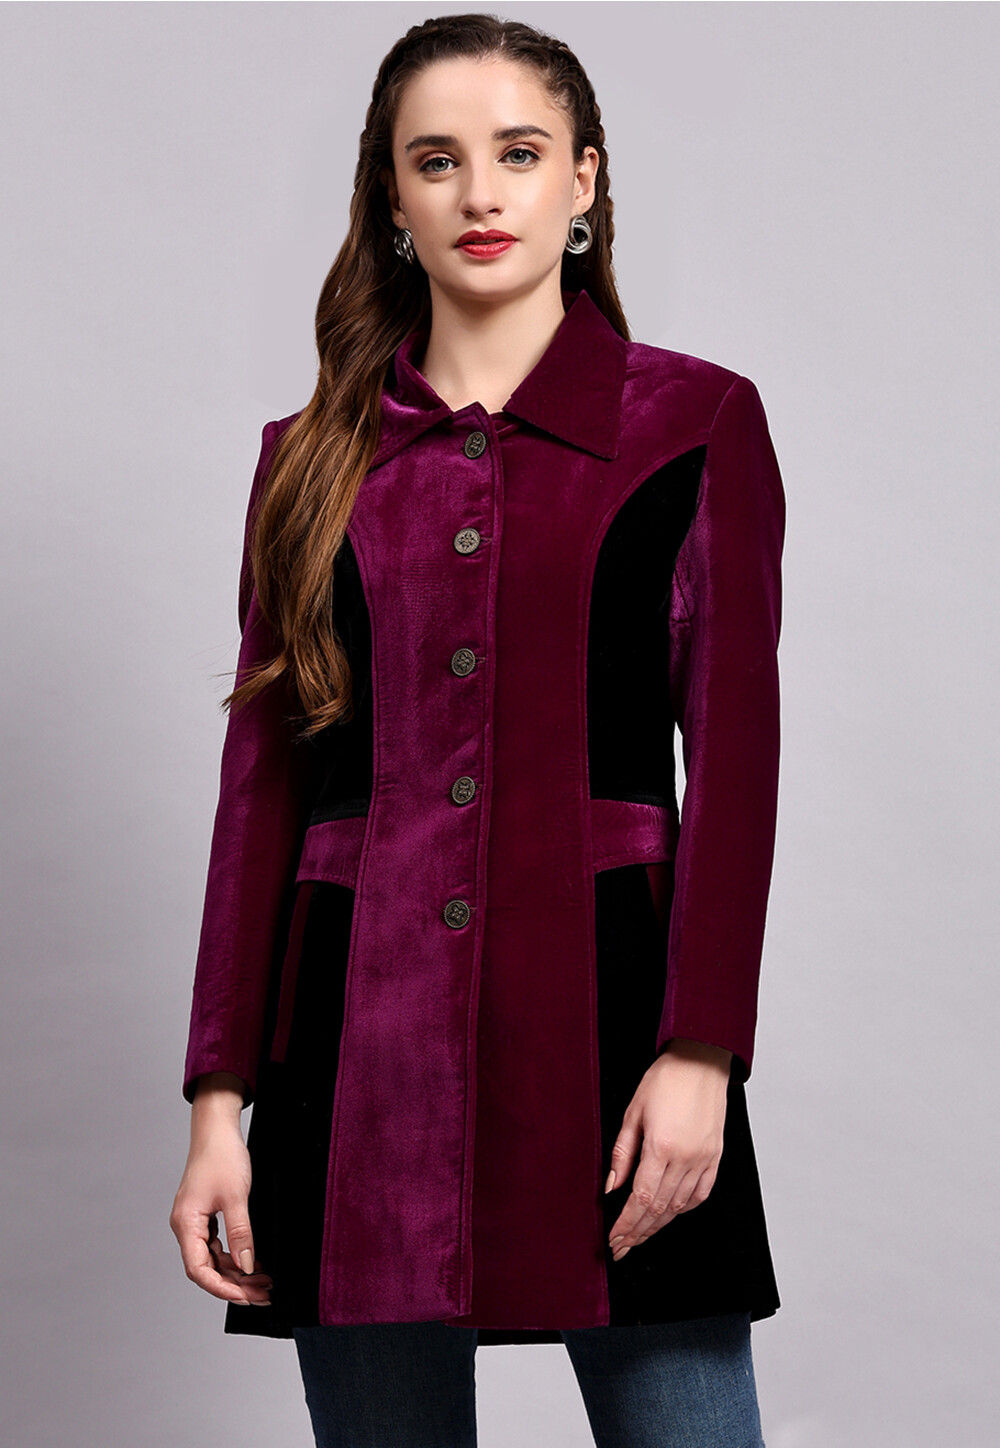 Velvet jackets look so rich and elegant - Chic at any age